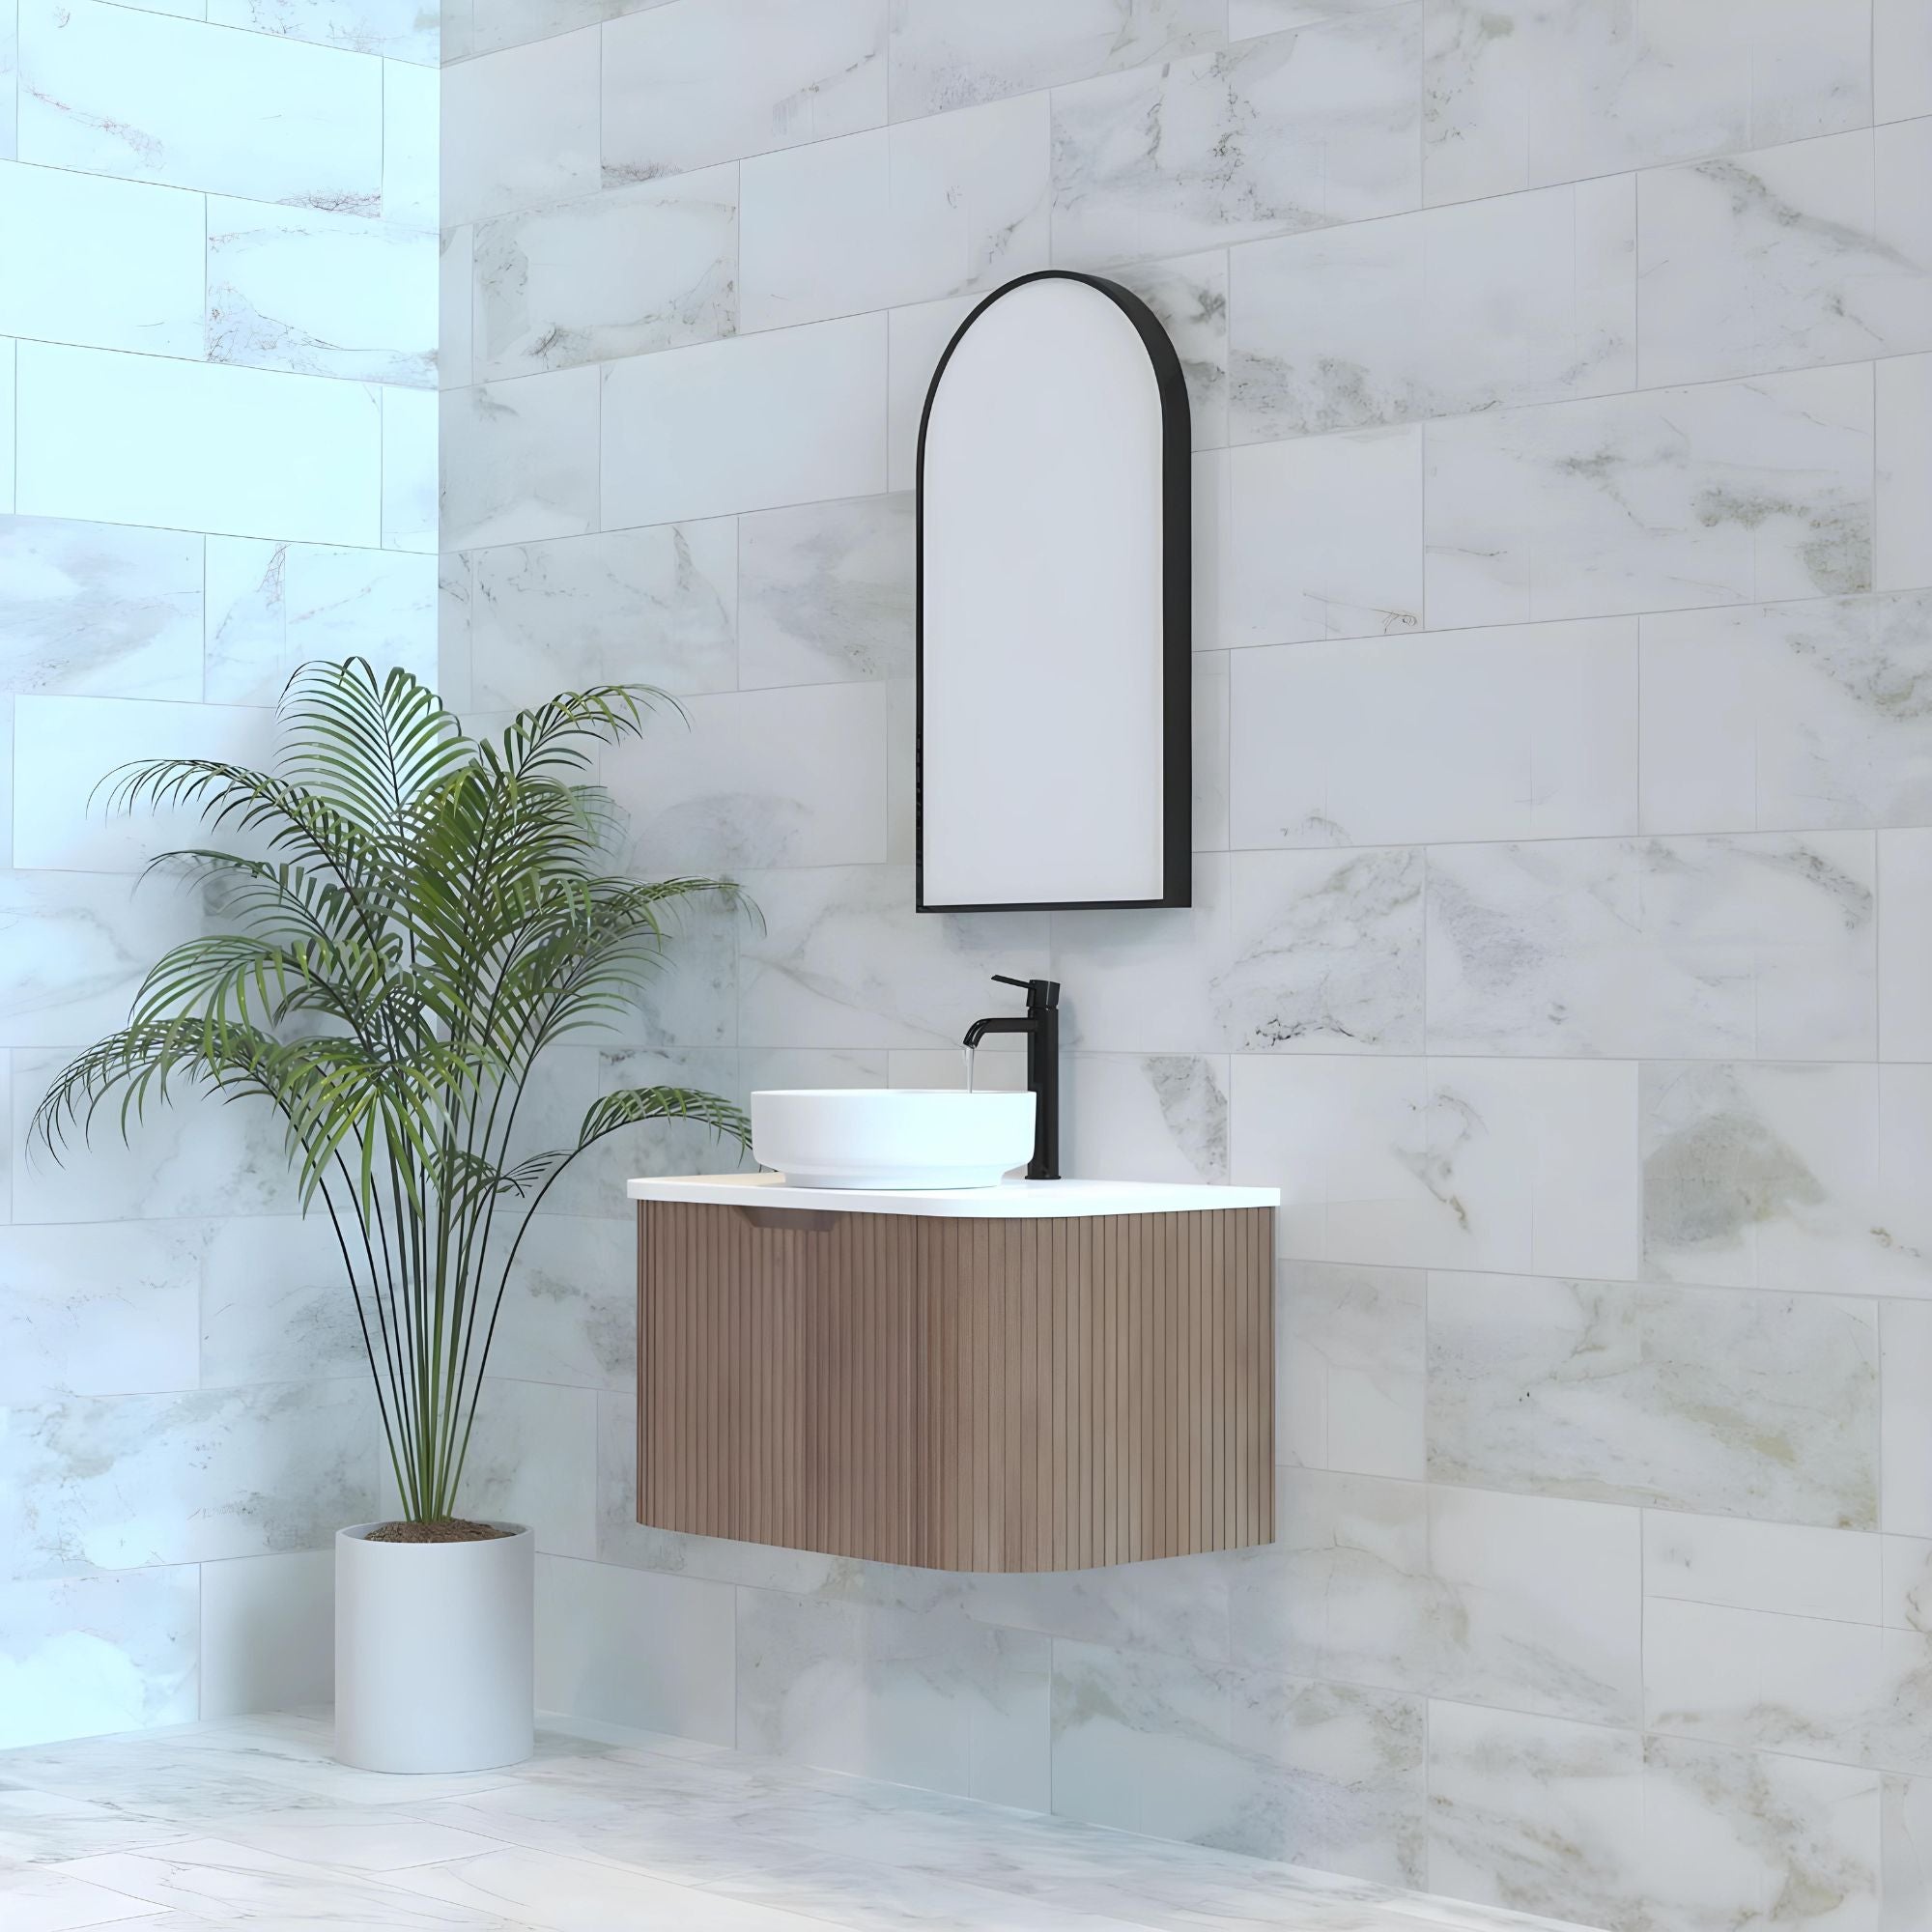 RIVA BERGEN SOLID TIMBER 750MM SINGLE BOWL WALL HUNG VANITY